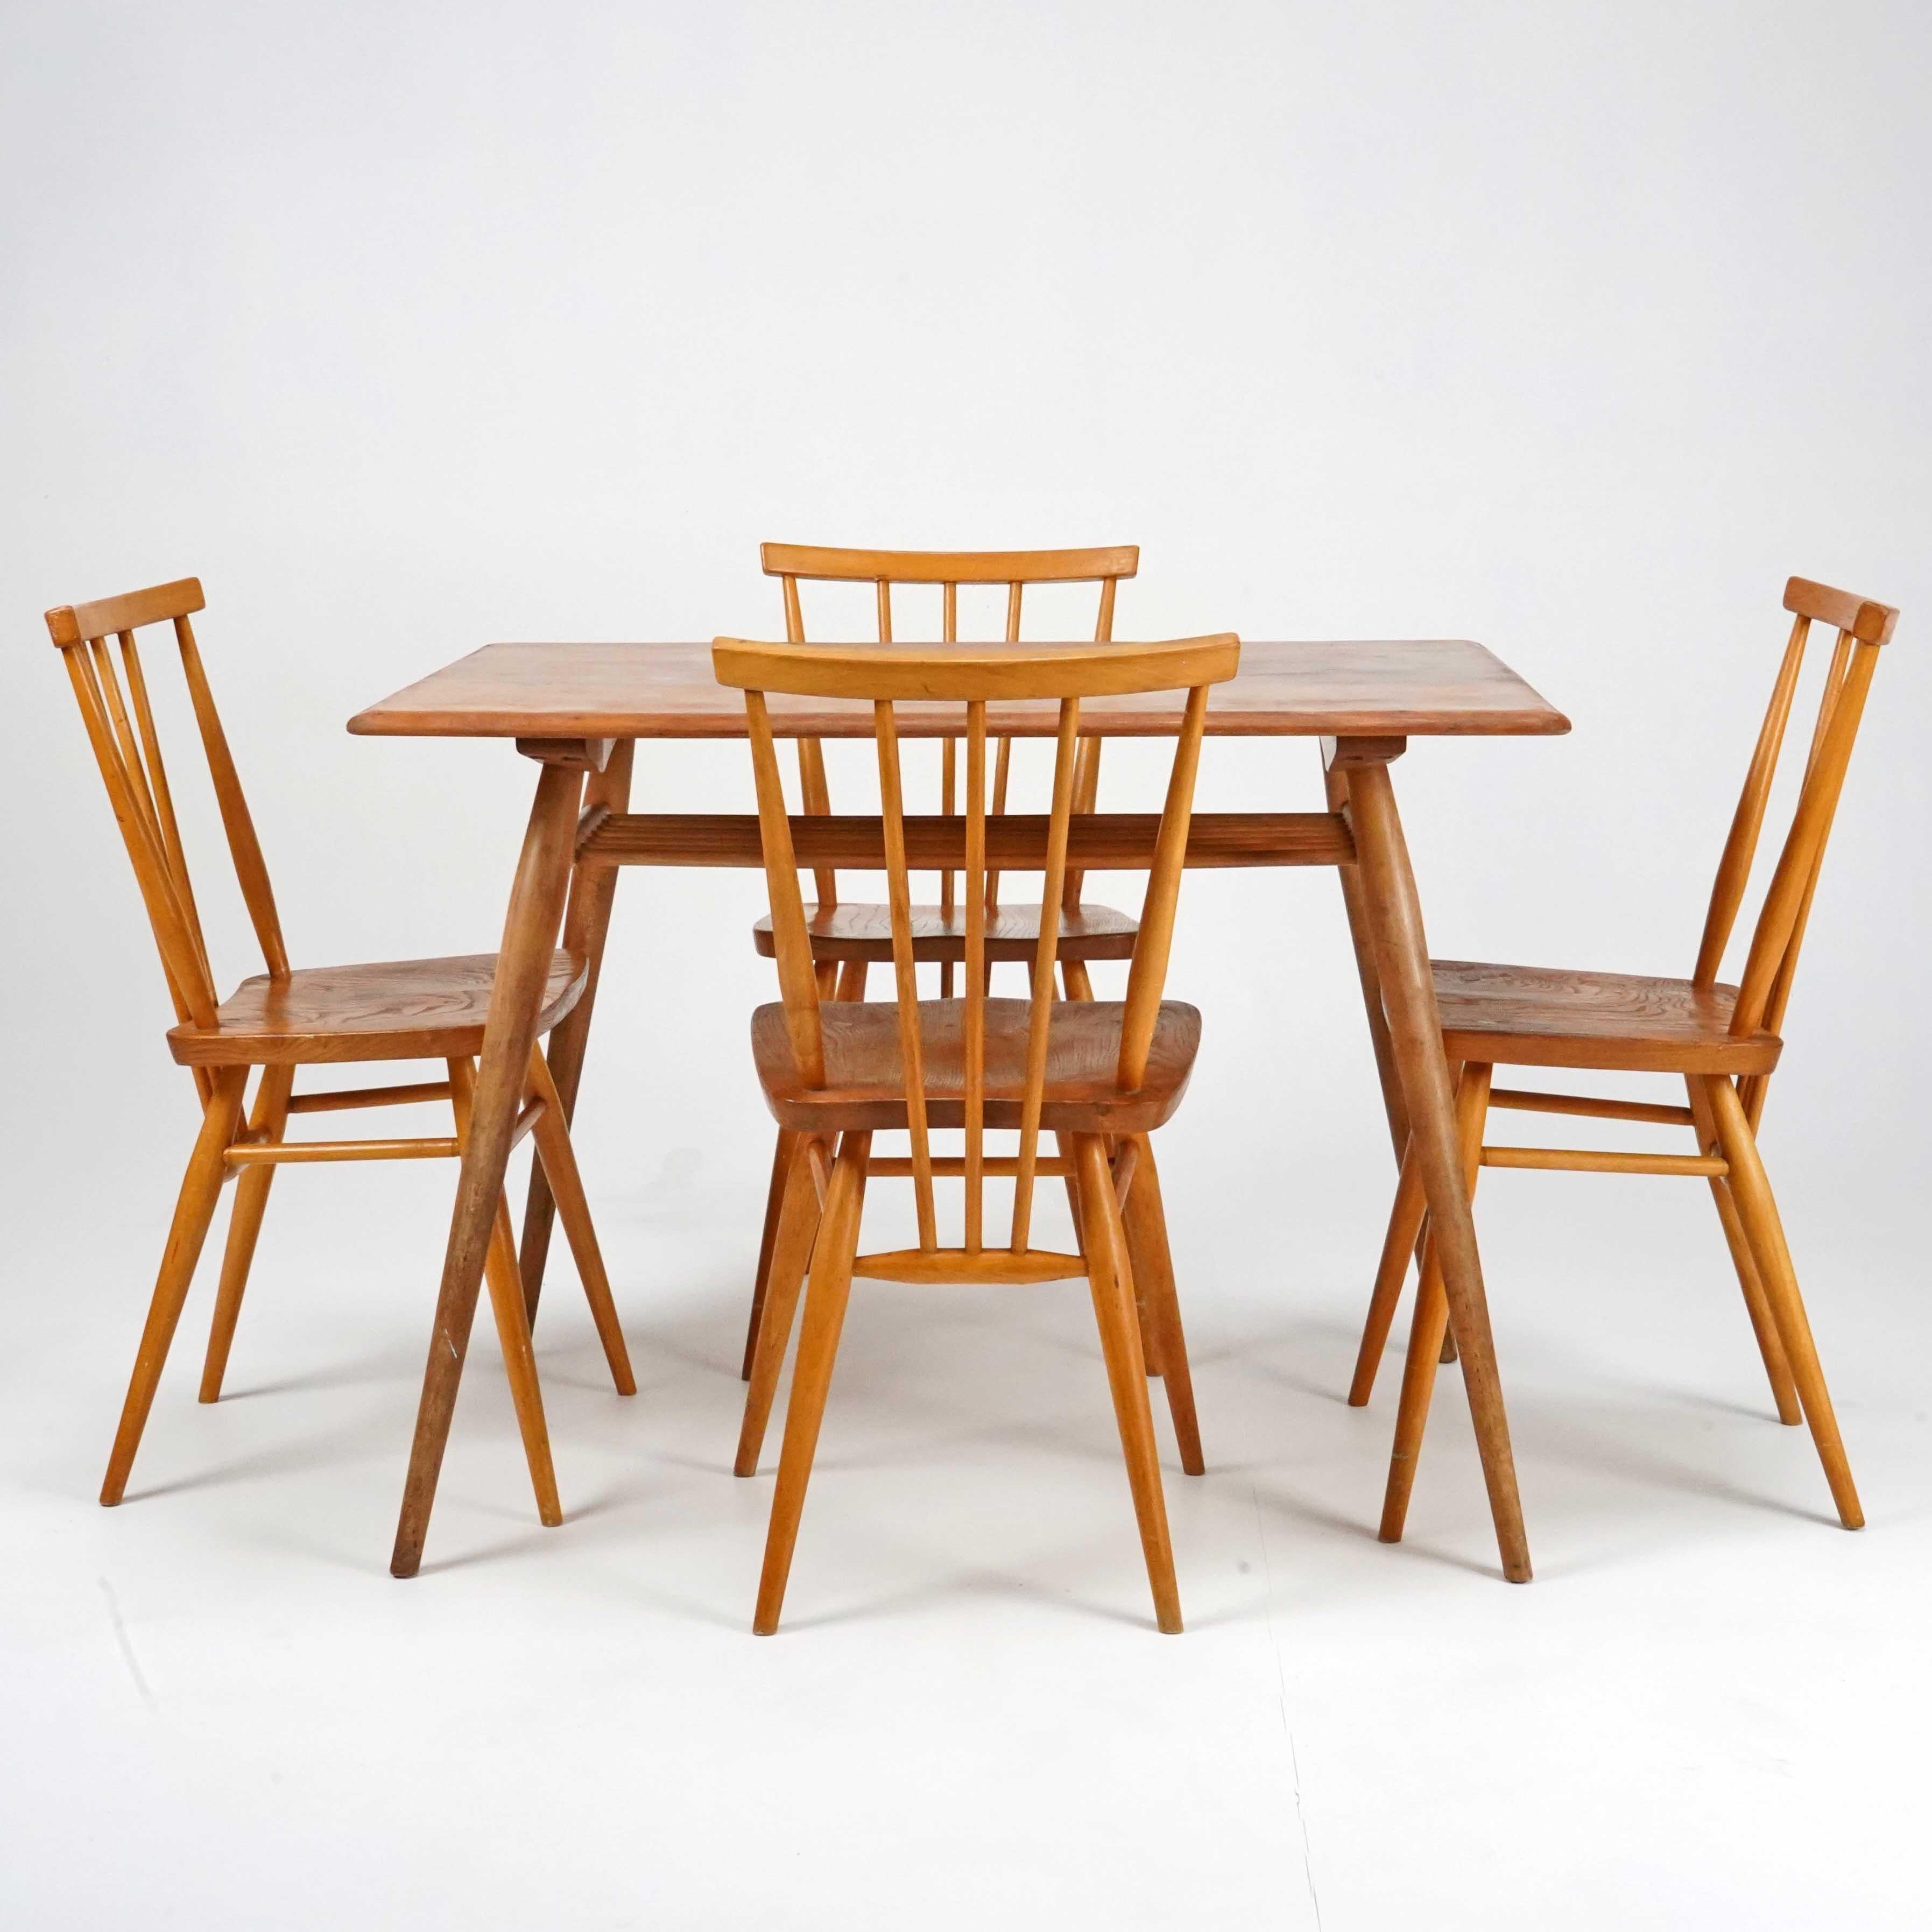 A Ercol breakfast table & chair set which comes with 4 all purpose stick back chairs and are all made from blonde British Elm. 
Please do take a careful look at all our pictures and note that these are antique or vintage pieces that will show sign